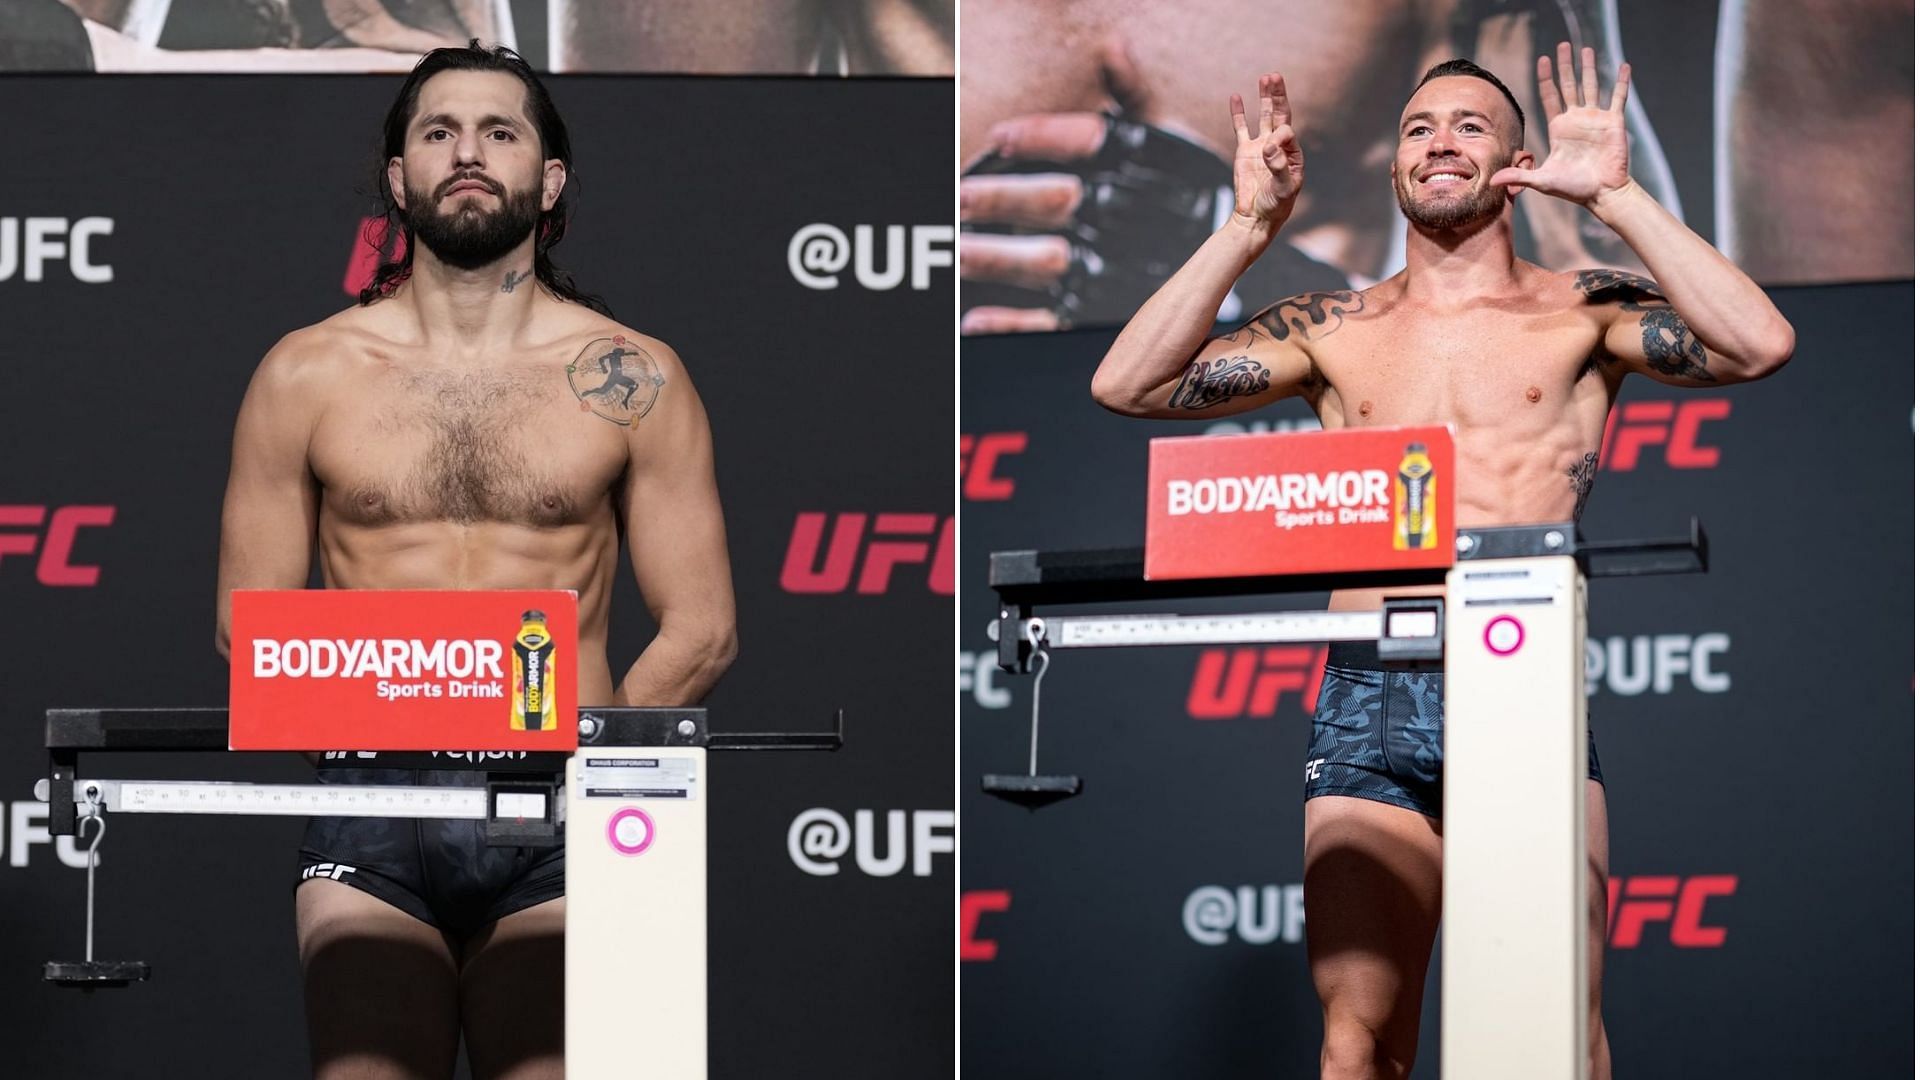 Jorge Masvidal (Left) and Colby Covington (Right) weighs in for UFC 272 [Image courtesy of @ufc Instagram]